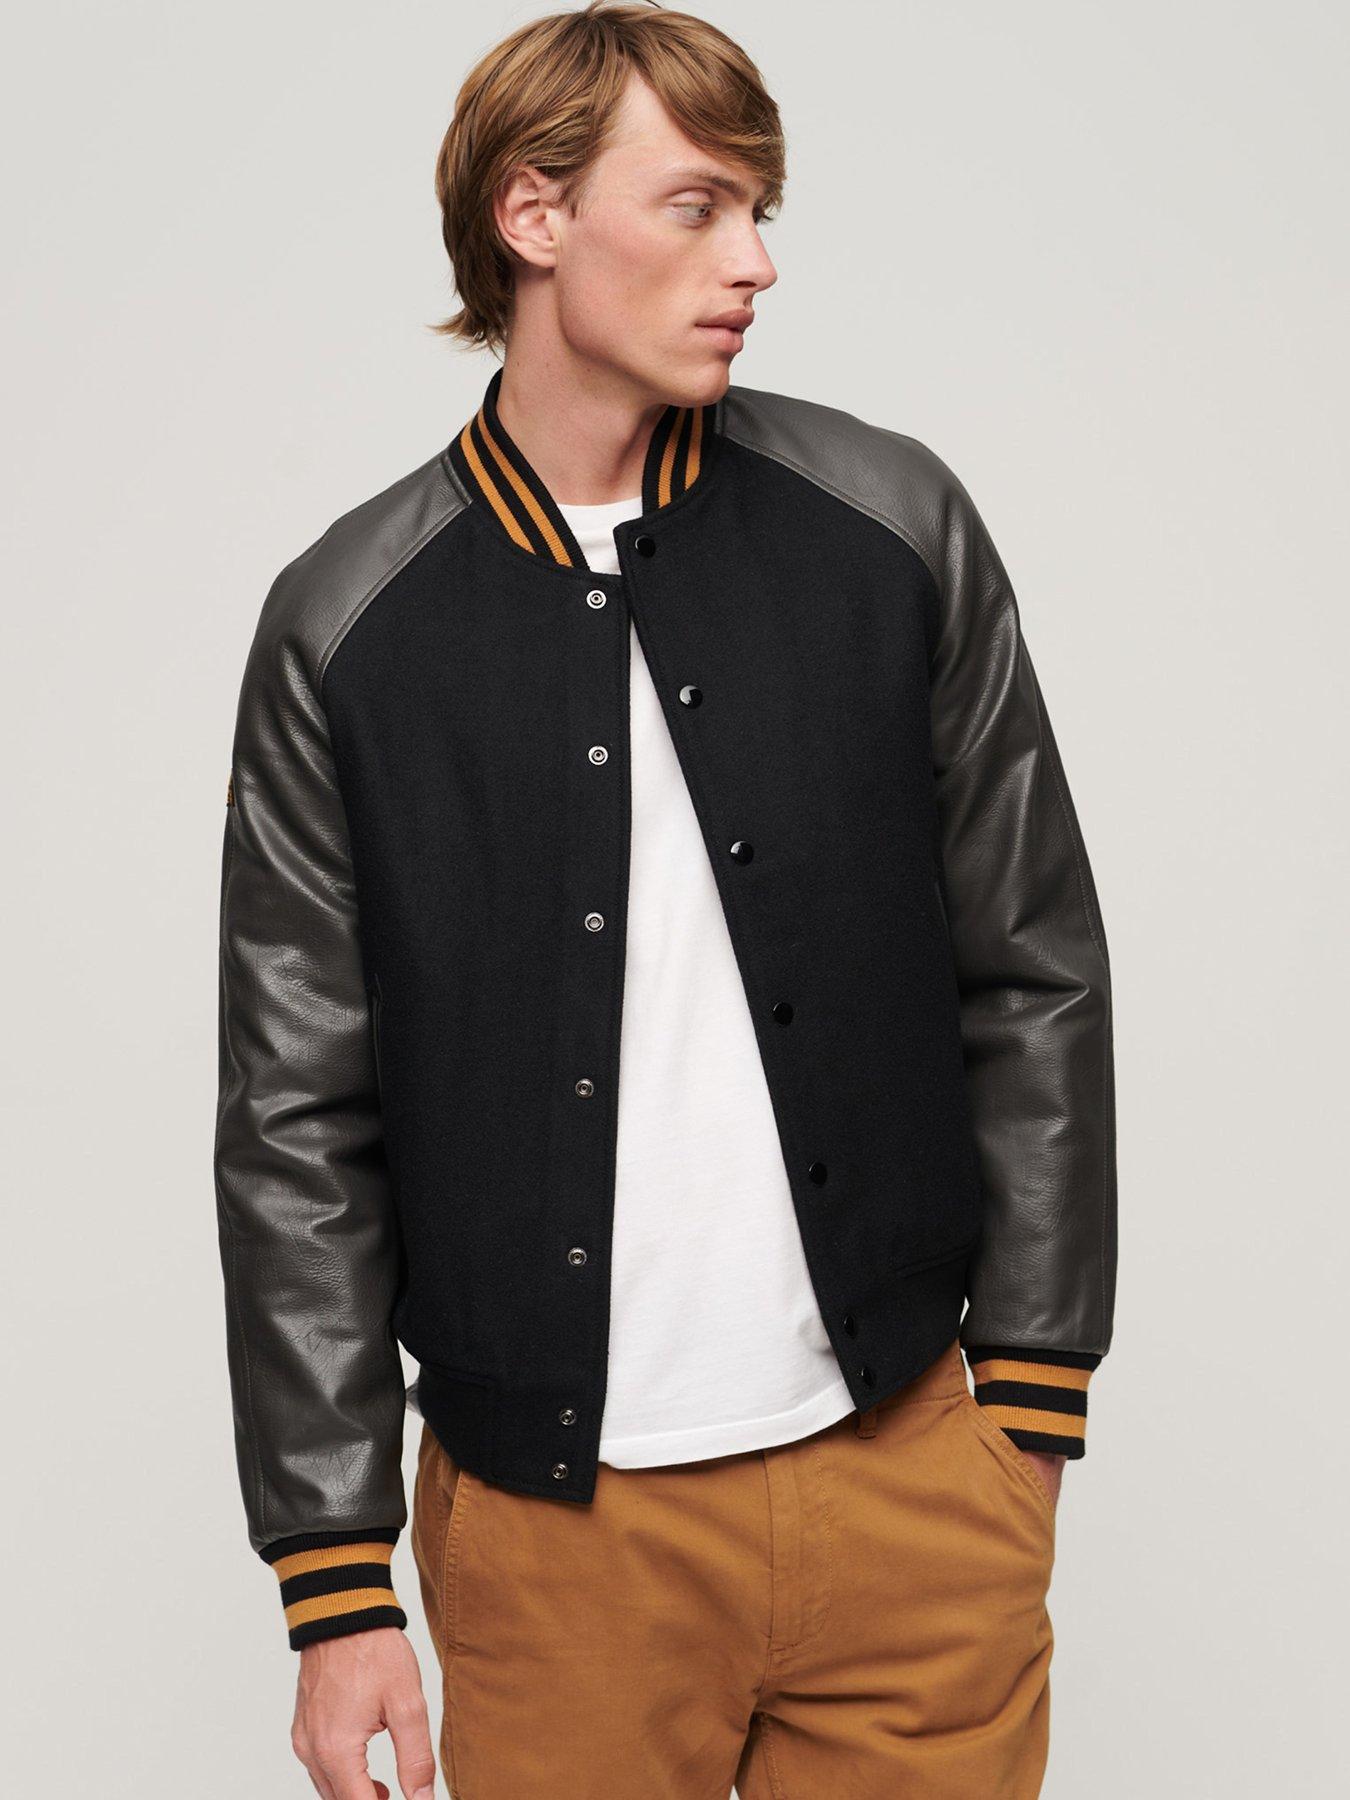 Superdry Green College Varsity Patch Bomber Jacket